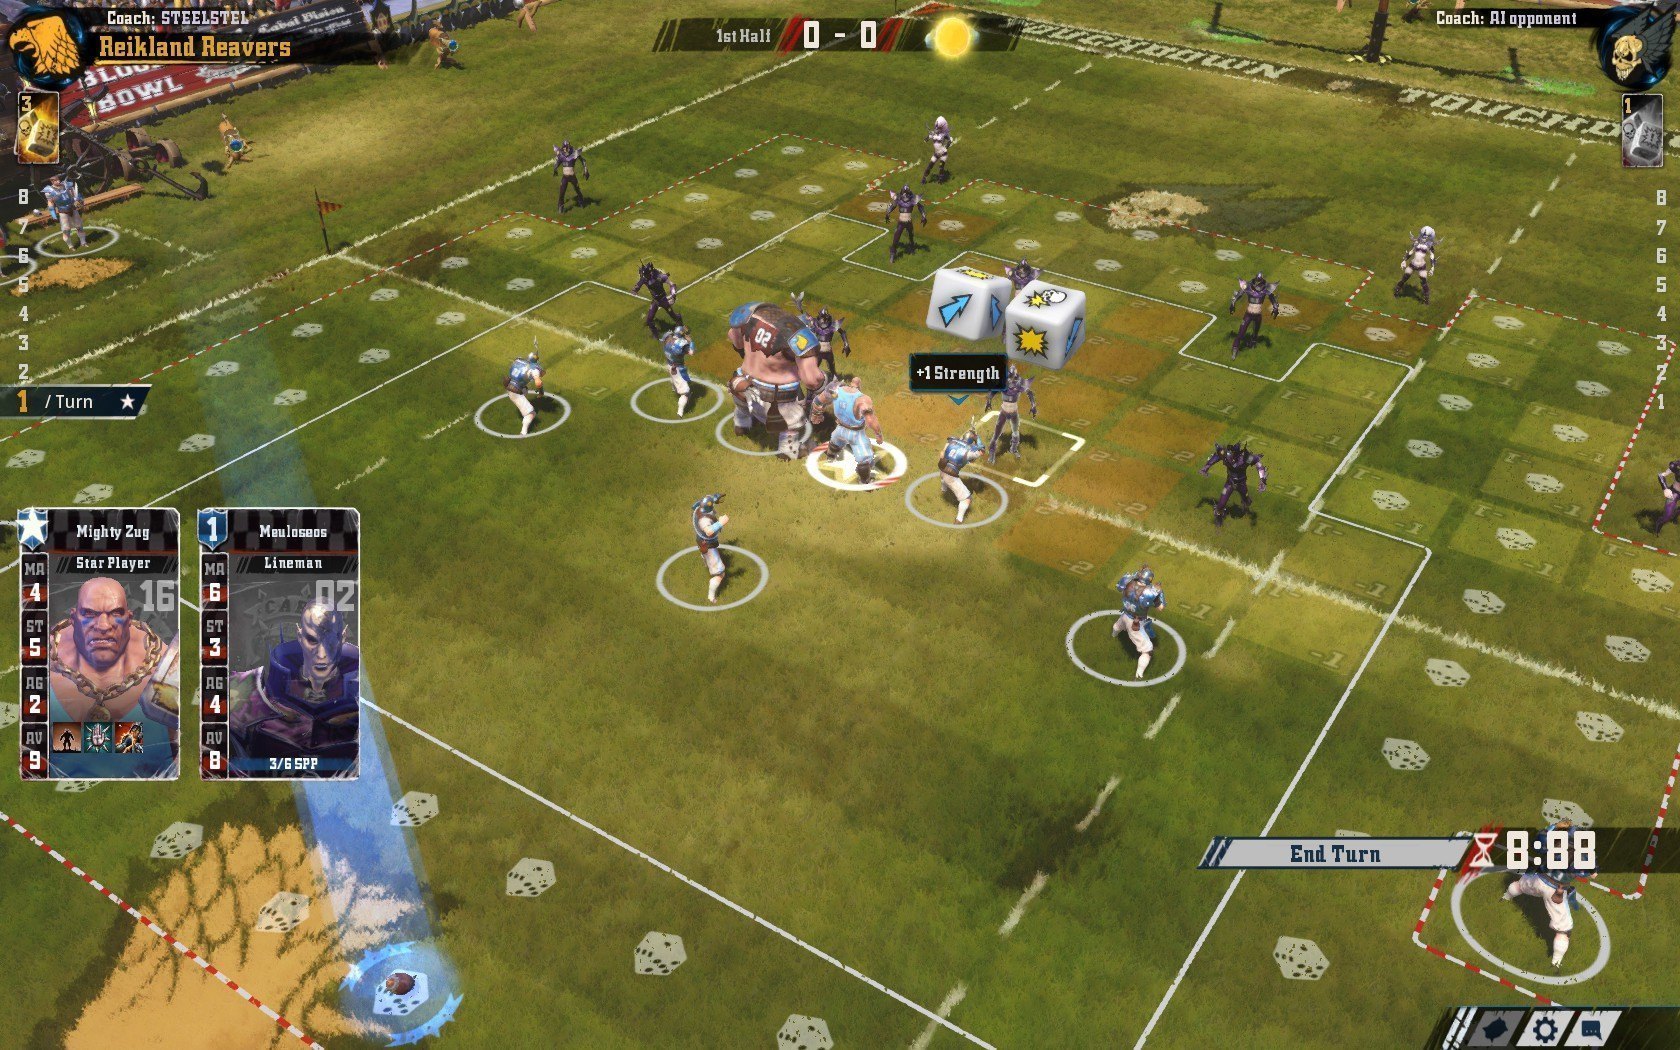 Blood Bowl 2 Review (Computer) - Official GBAtemp Review | GBAtemp.net -  The Independent Video Game Community